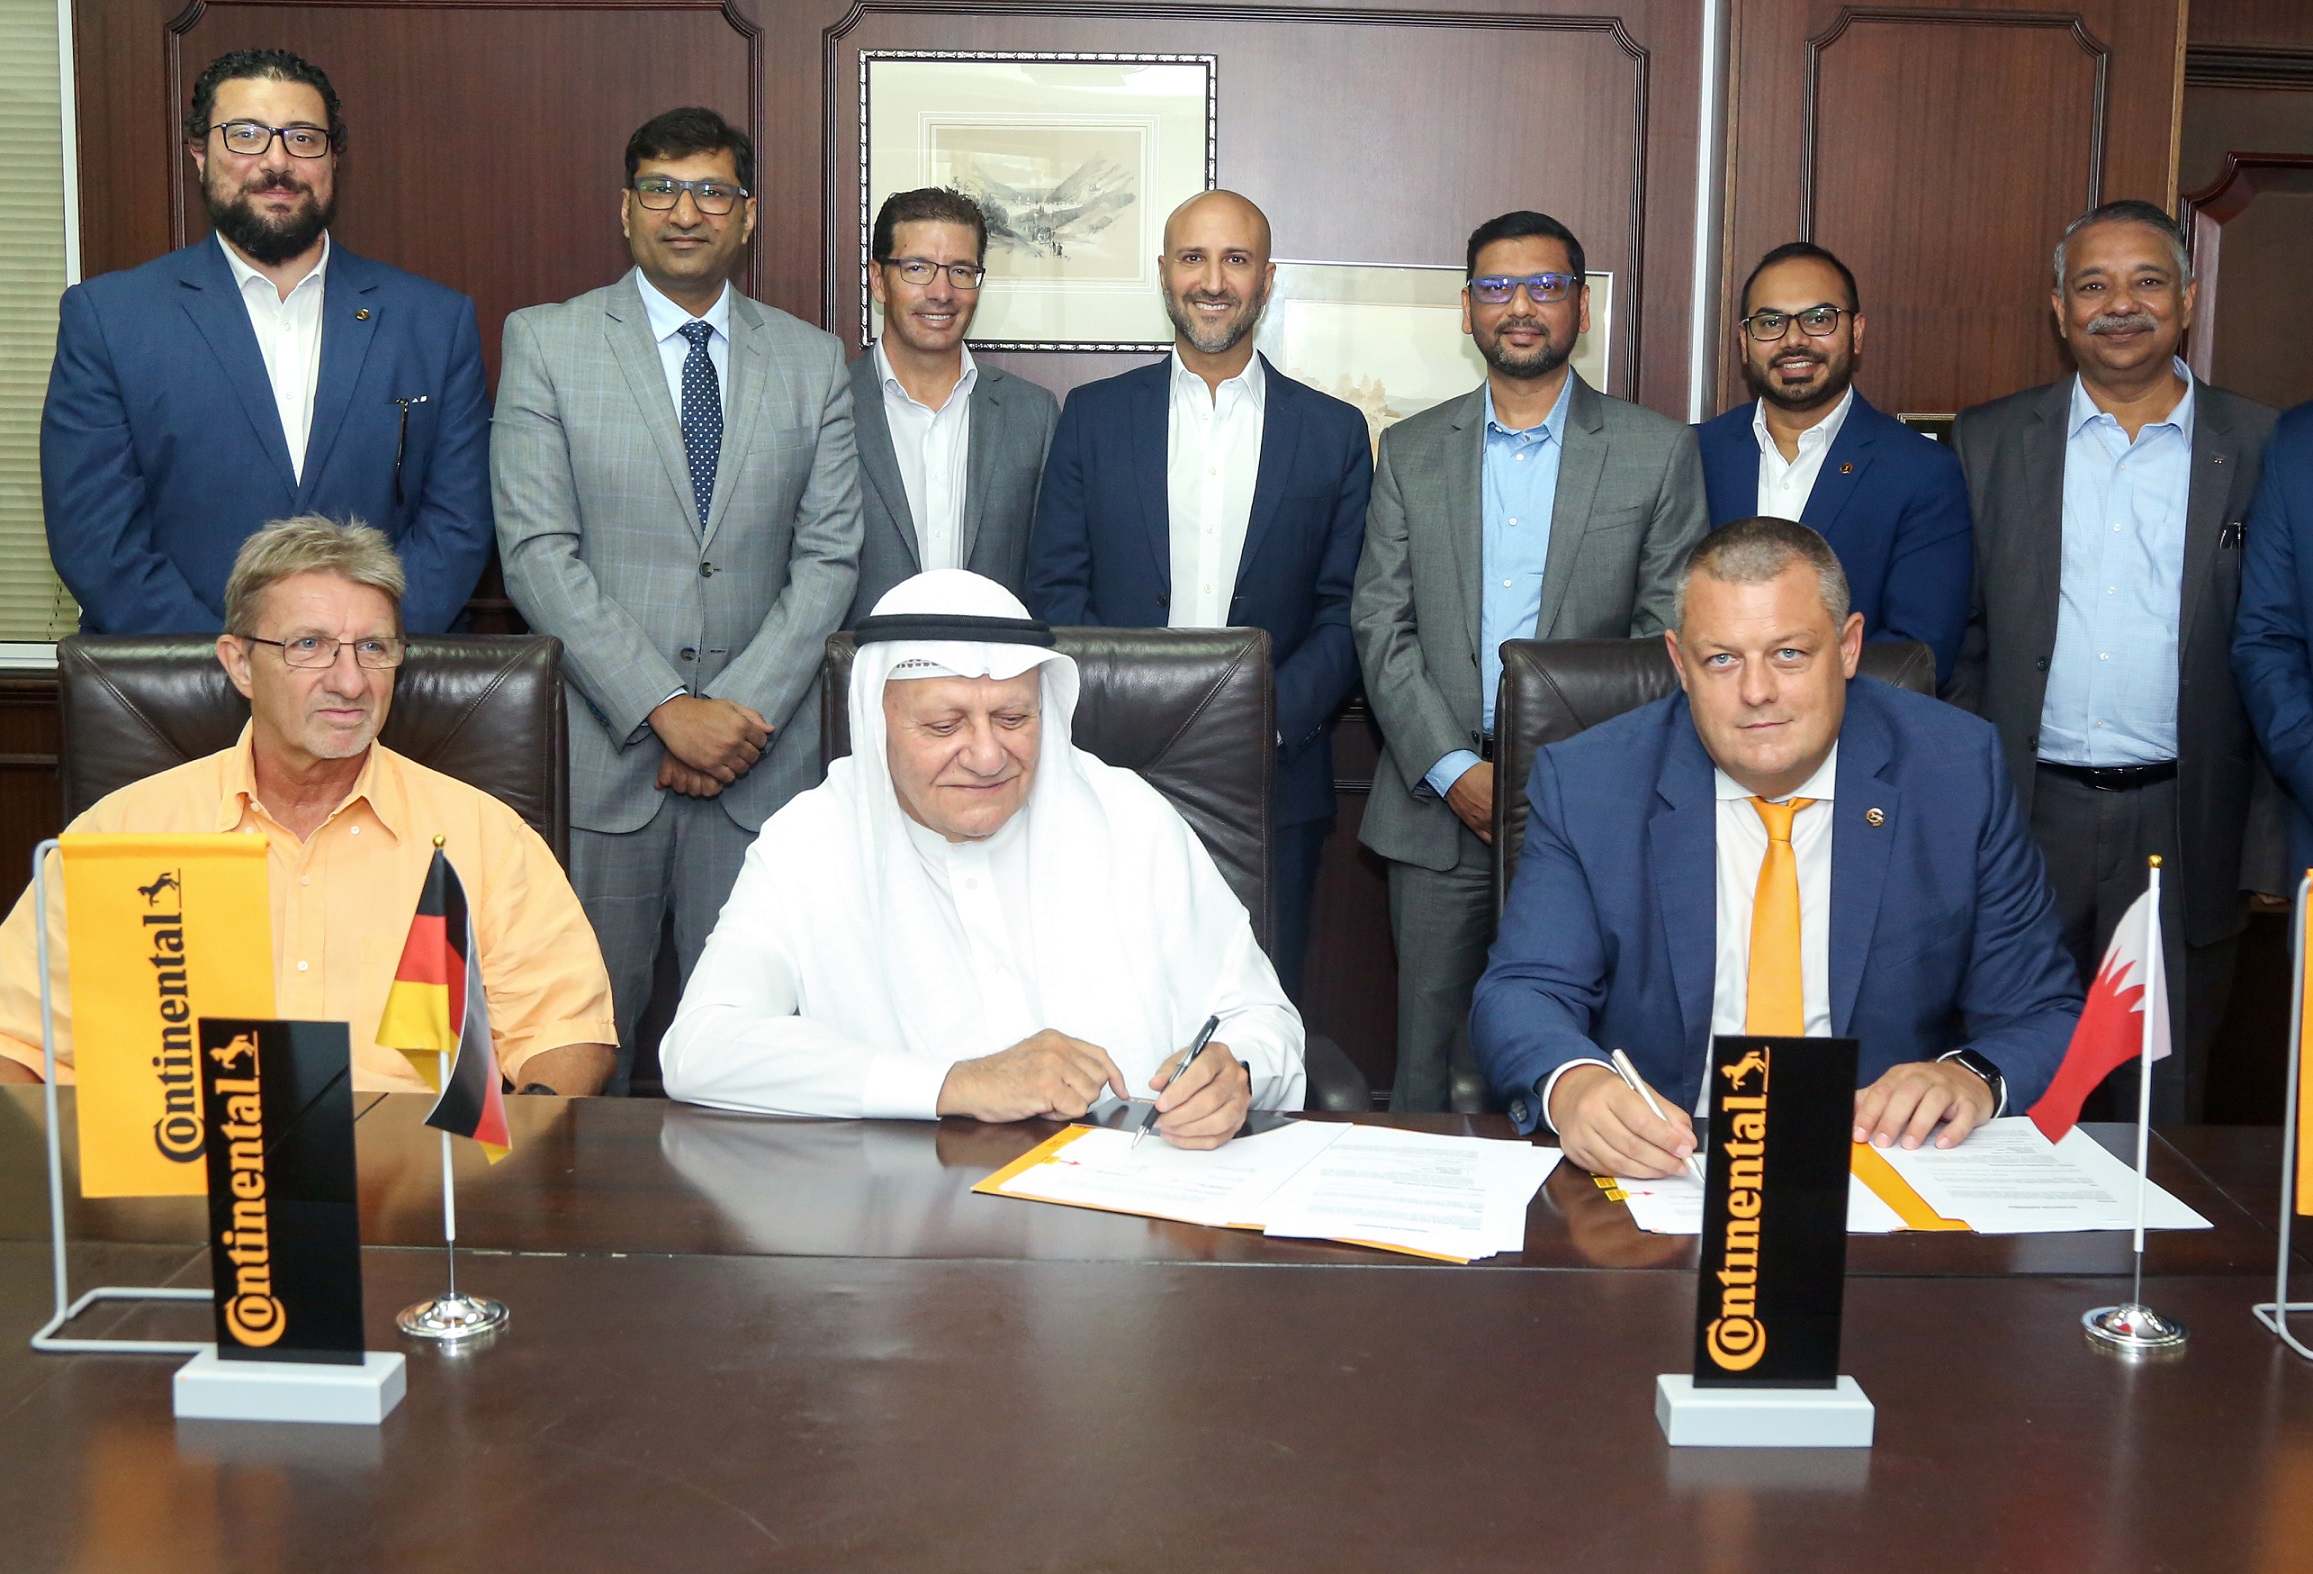 Continental and YK Almoayyed & Sons sign partnership agreement in the Kingdom of Bahrain